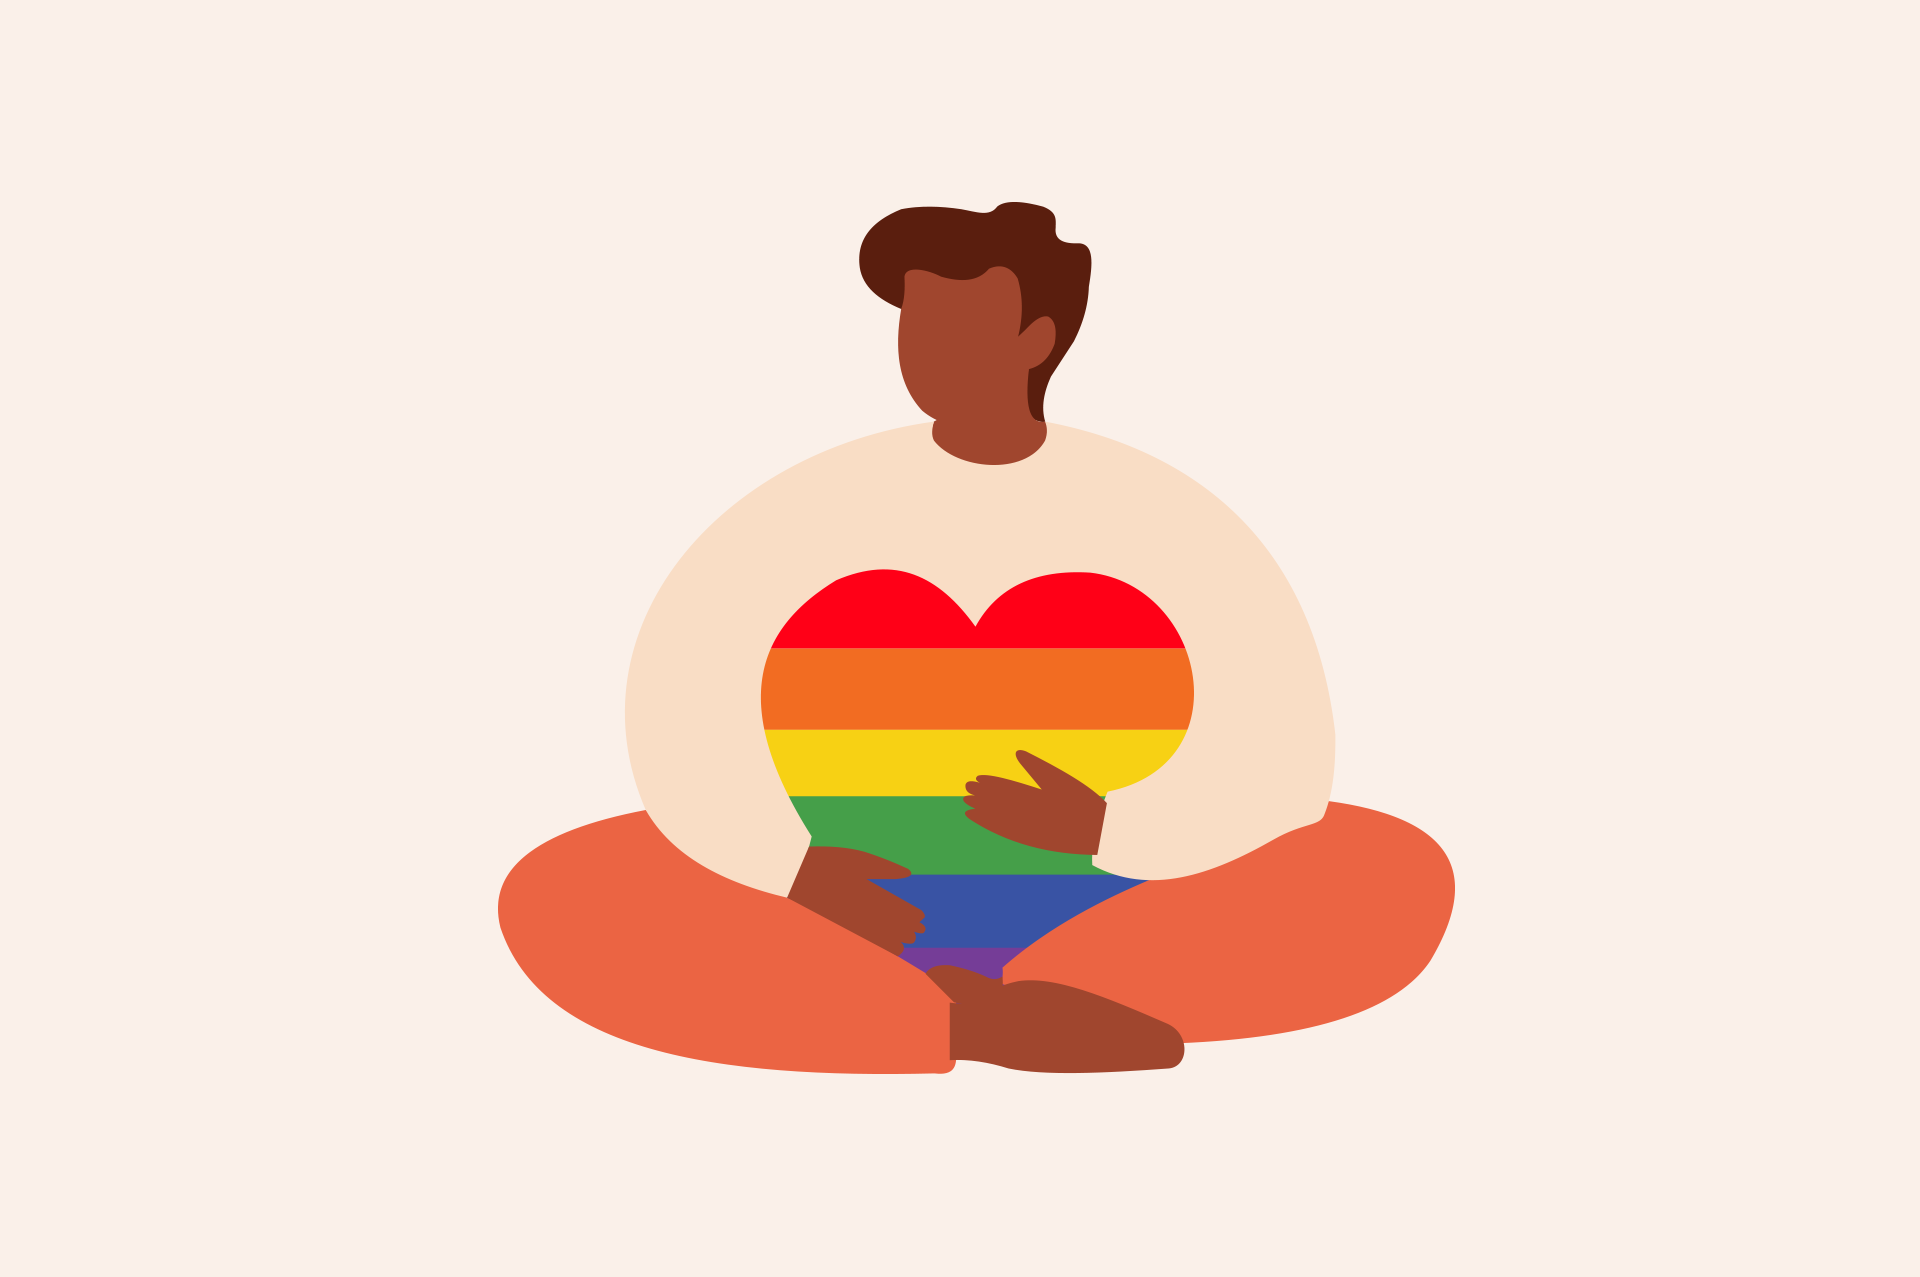 An illustration of a person holding a heart with the pride flag in it